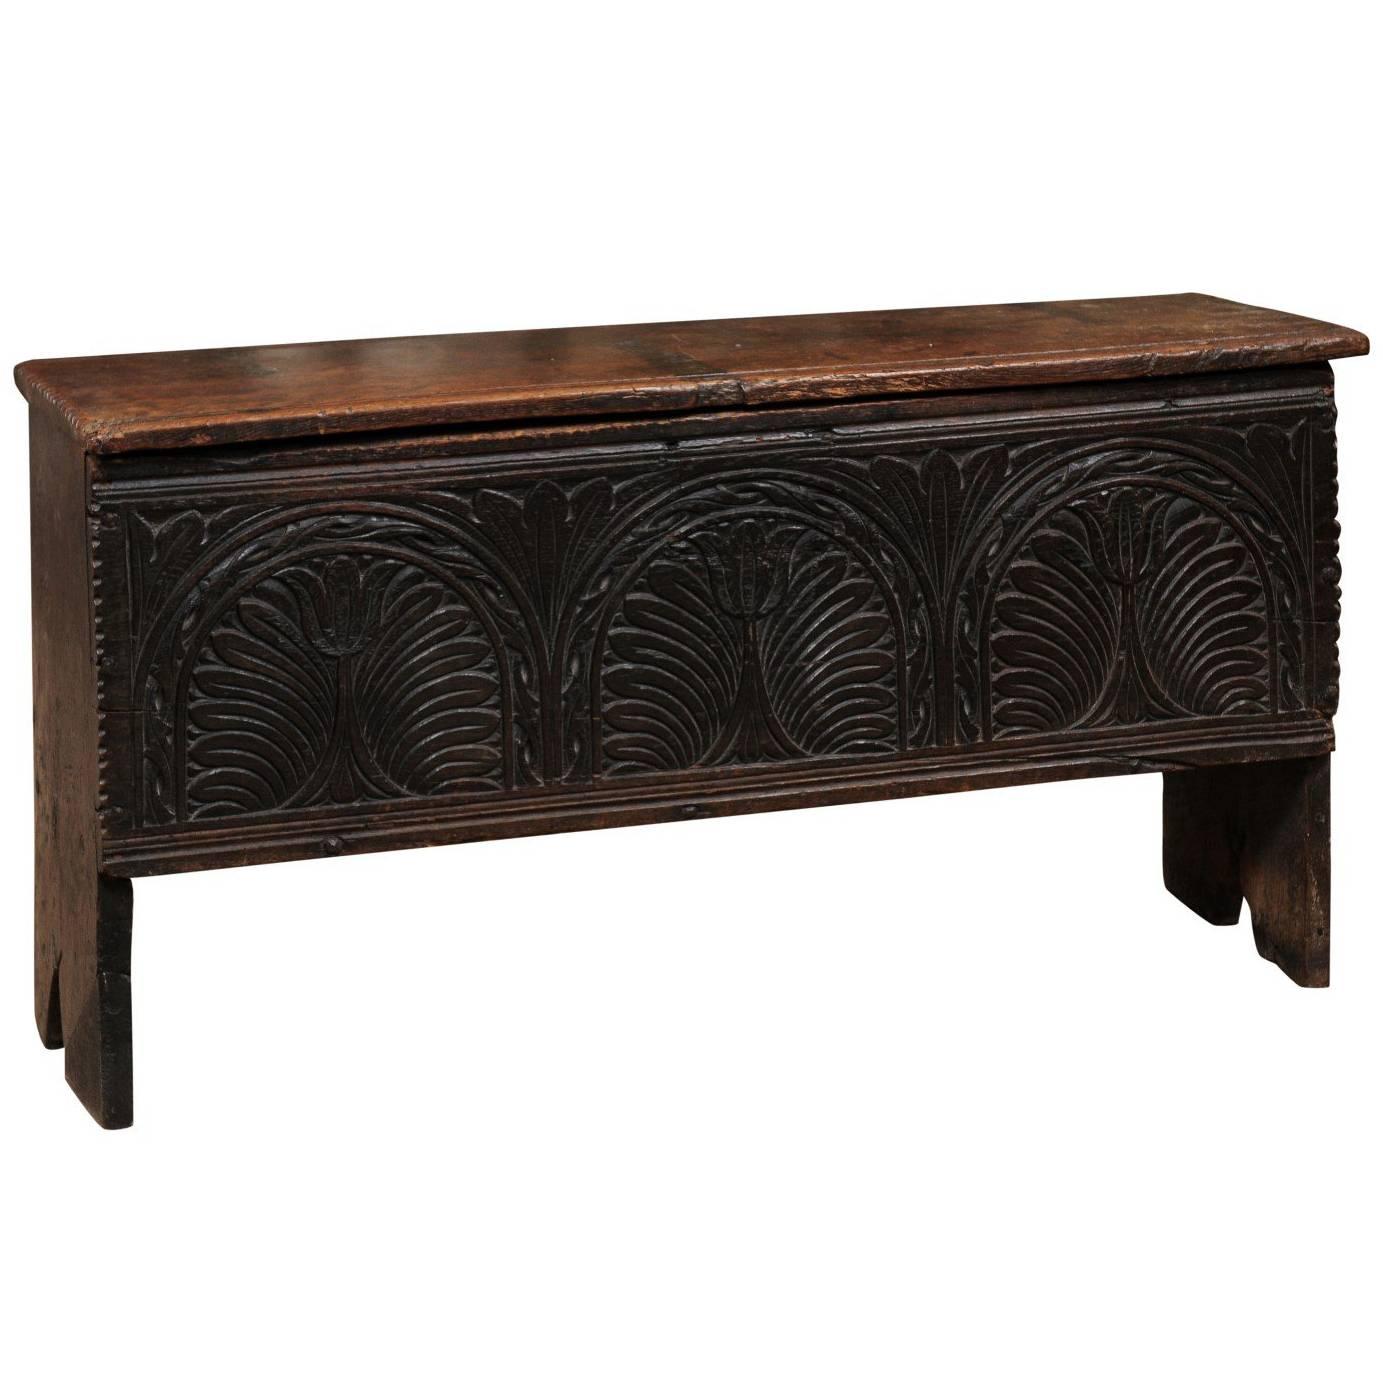 18th Century English Footed Oak Coffer with Carved Tulips